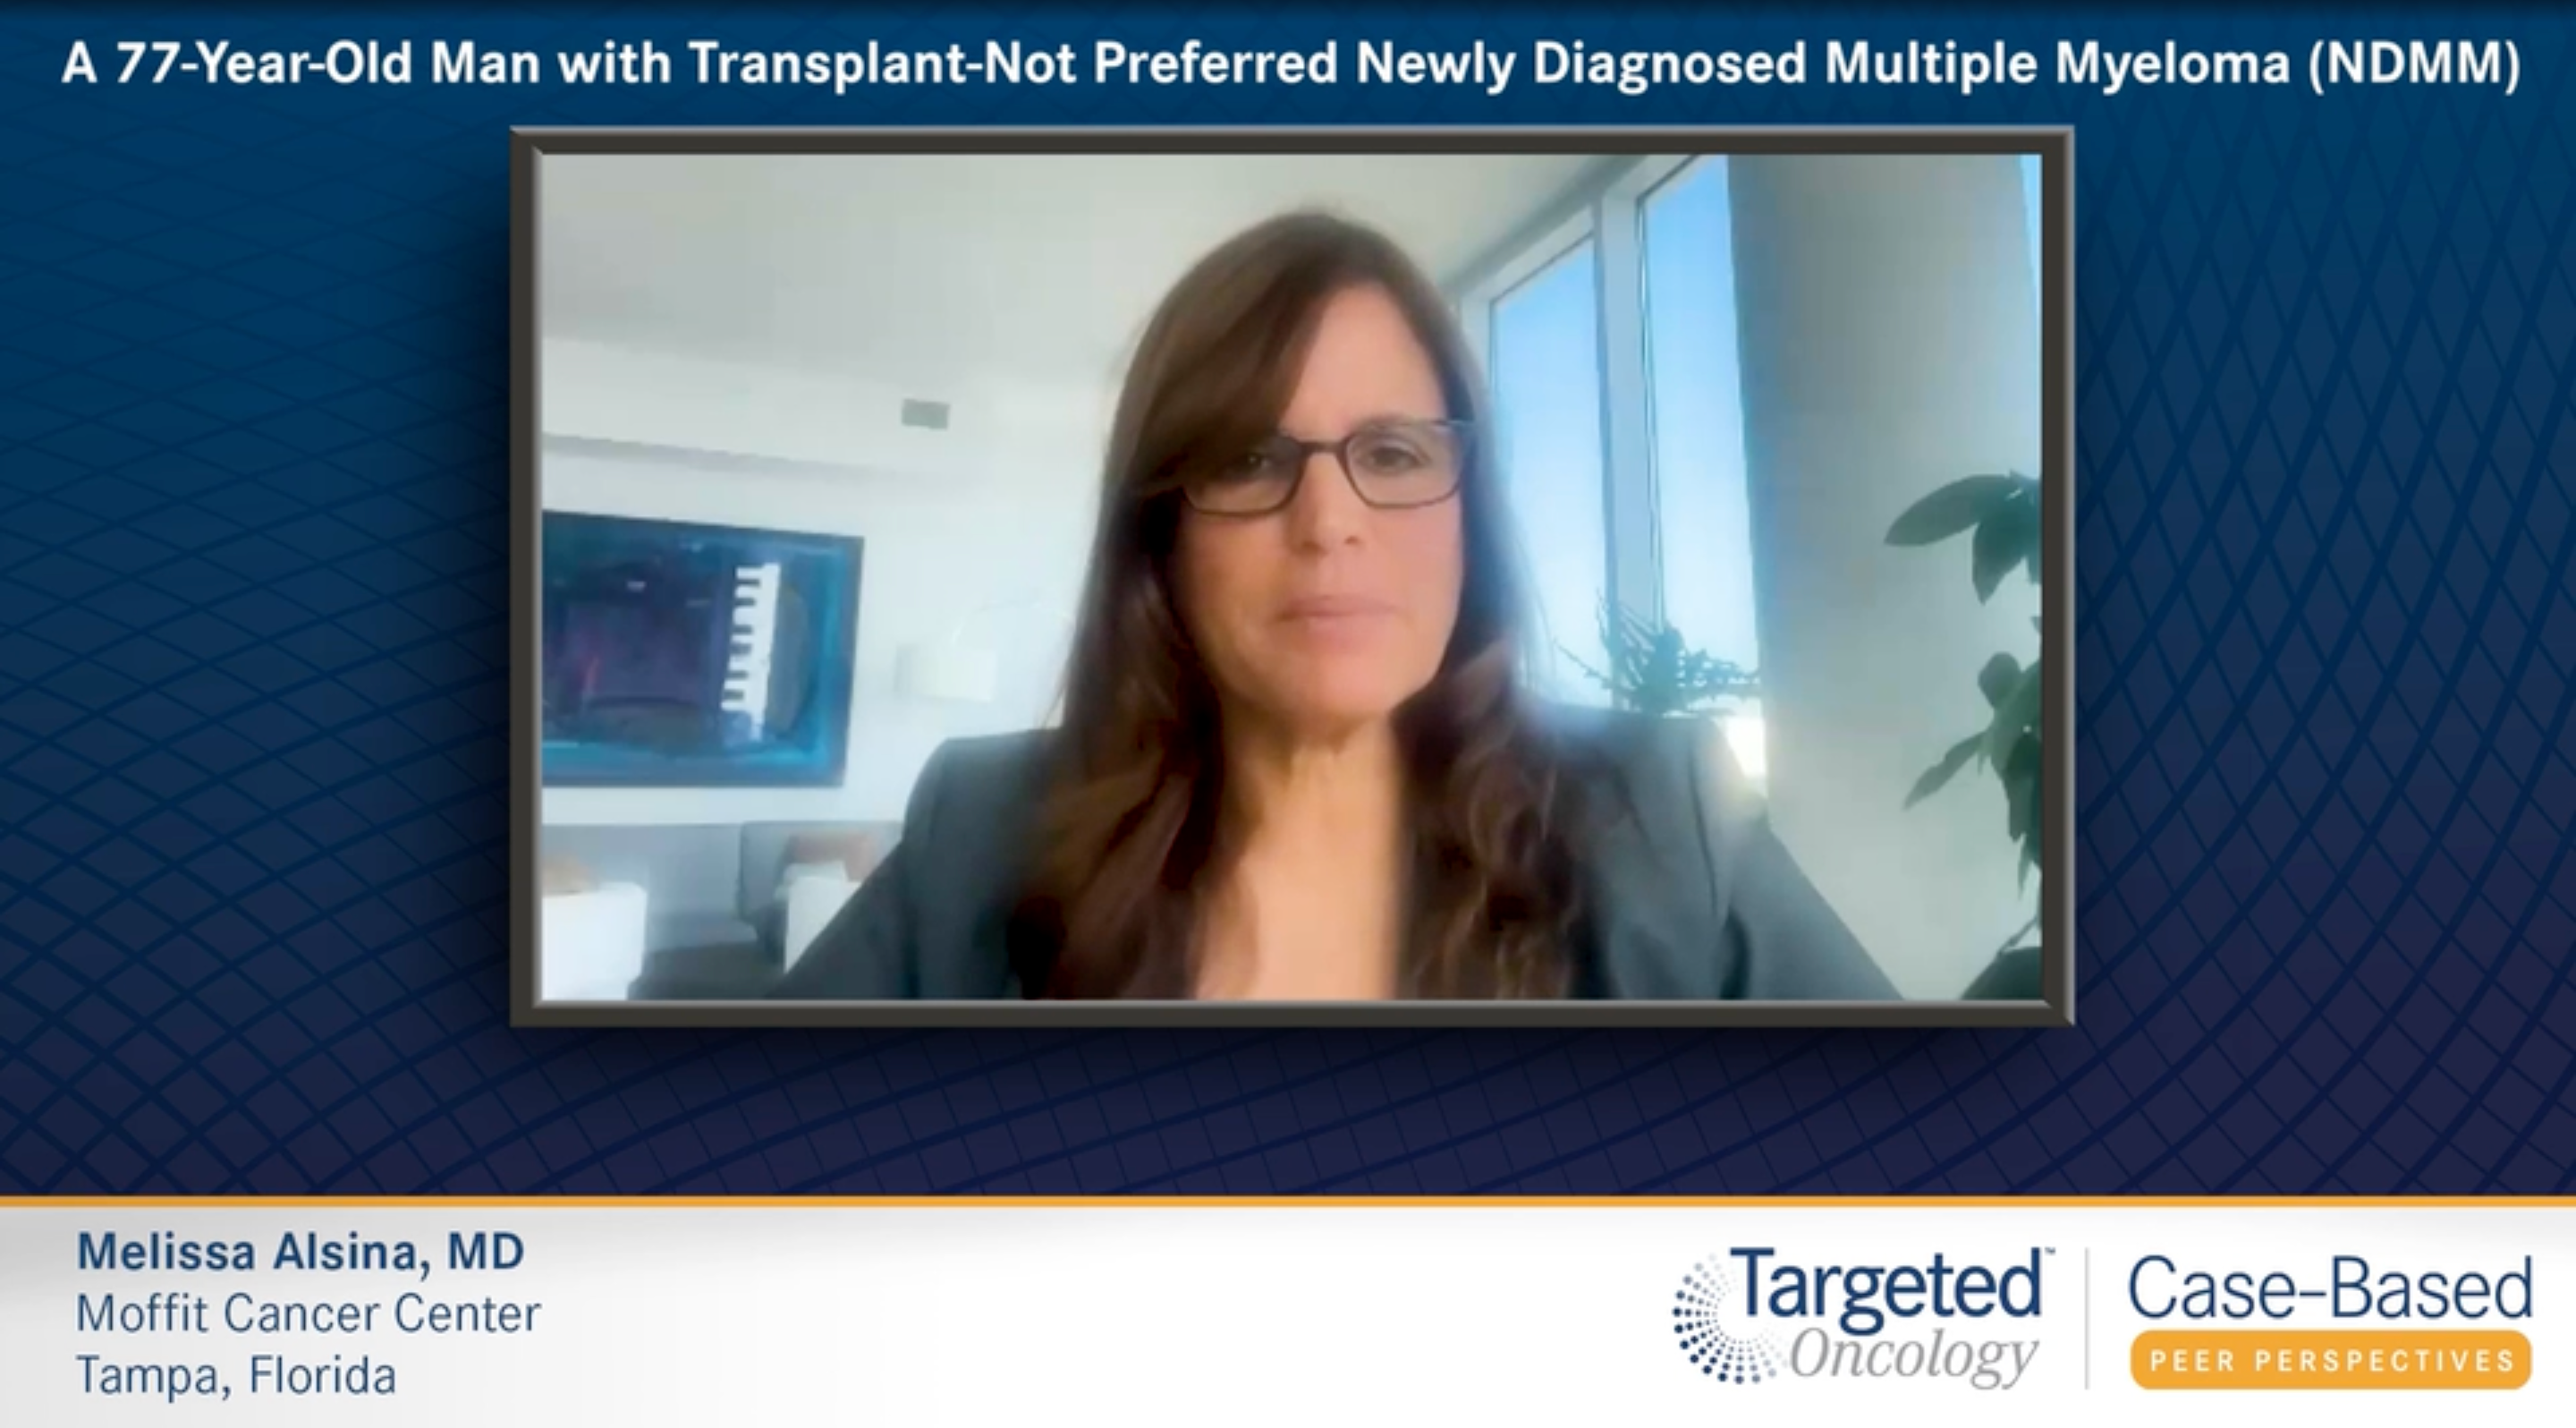 Toxicity Management in Patients with Transplant-Not Preferred NDMM